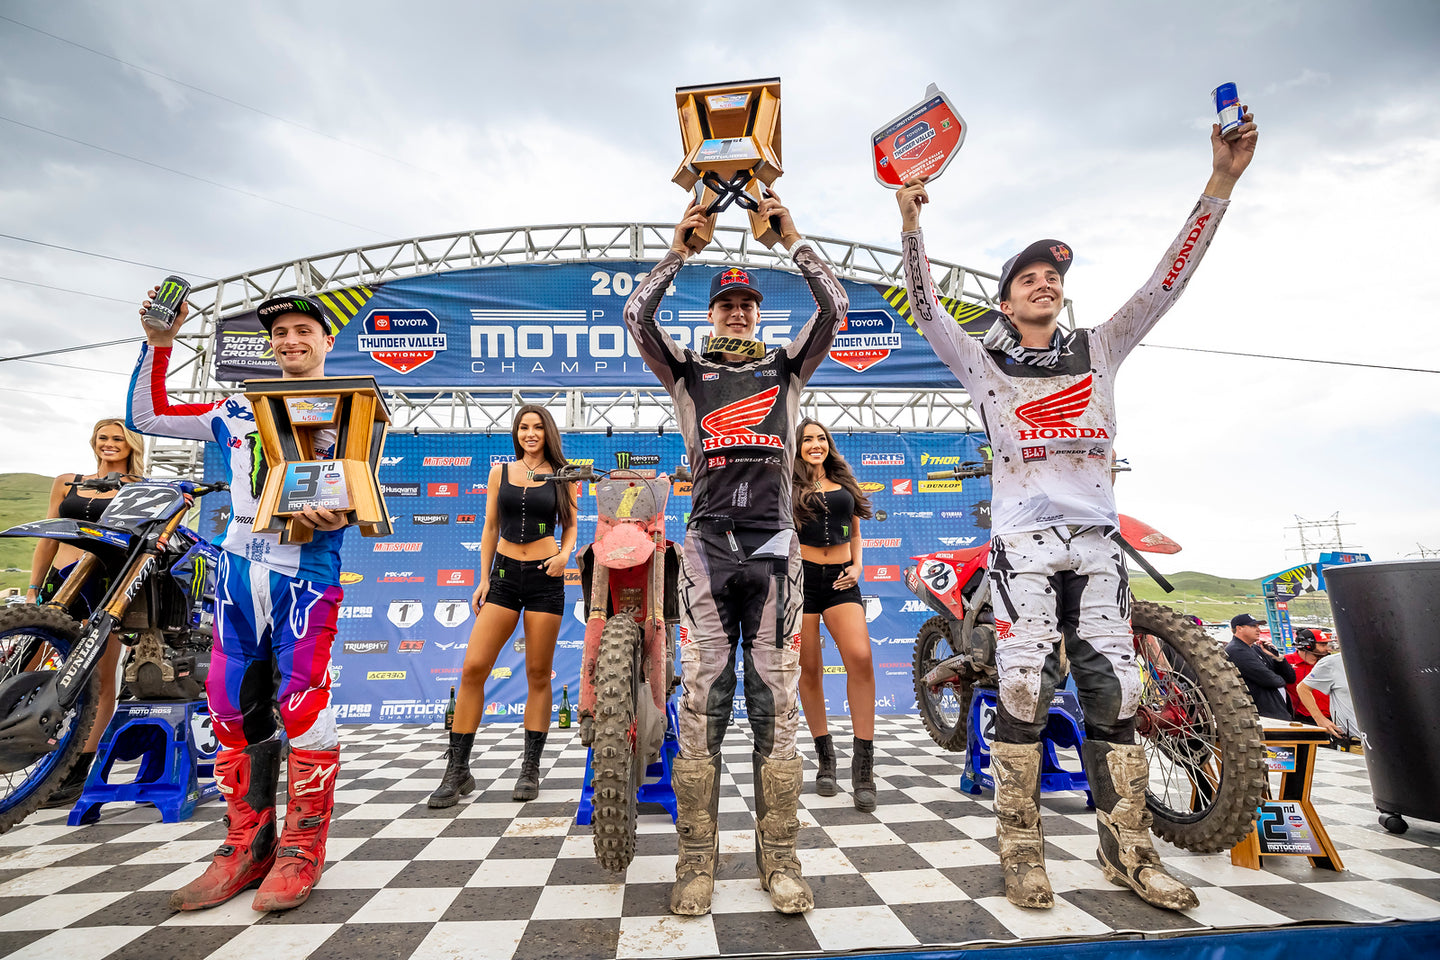 ALPINESTARS PRO MOTOCROSS CHAMPIONSHIP 450 S-M10 HELMET TOP FIVE LOCK-OUT AS JETT EDGES HUNTER IN TITANTIC LAWRENCE BROTHERS SHOUT-OUT AT THUNDER VALLEY, COLORADO